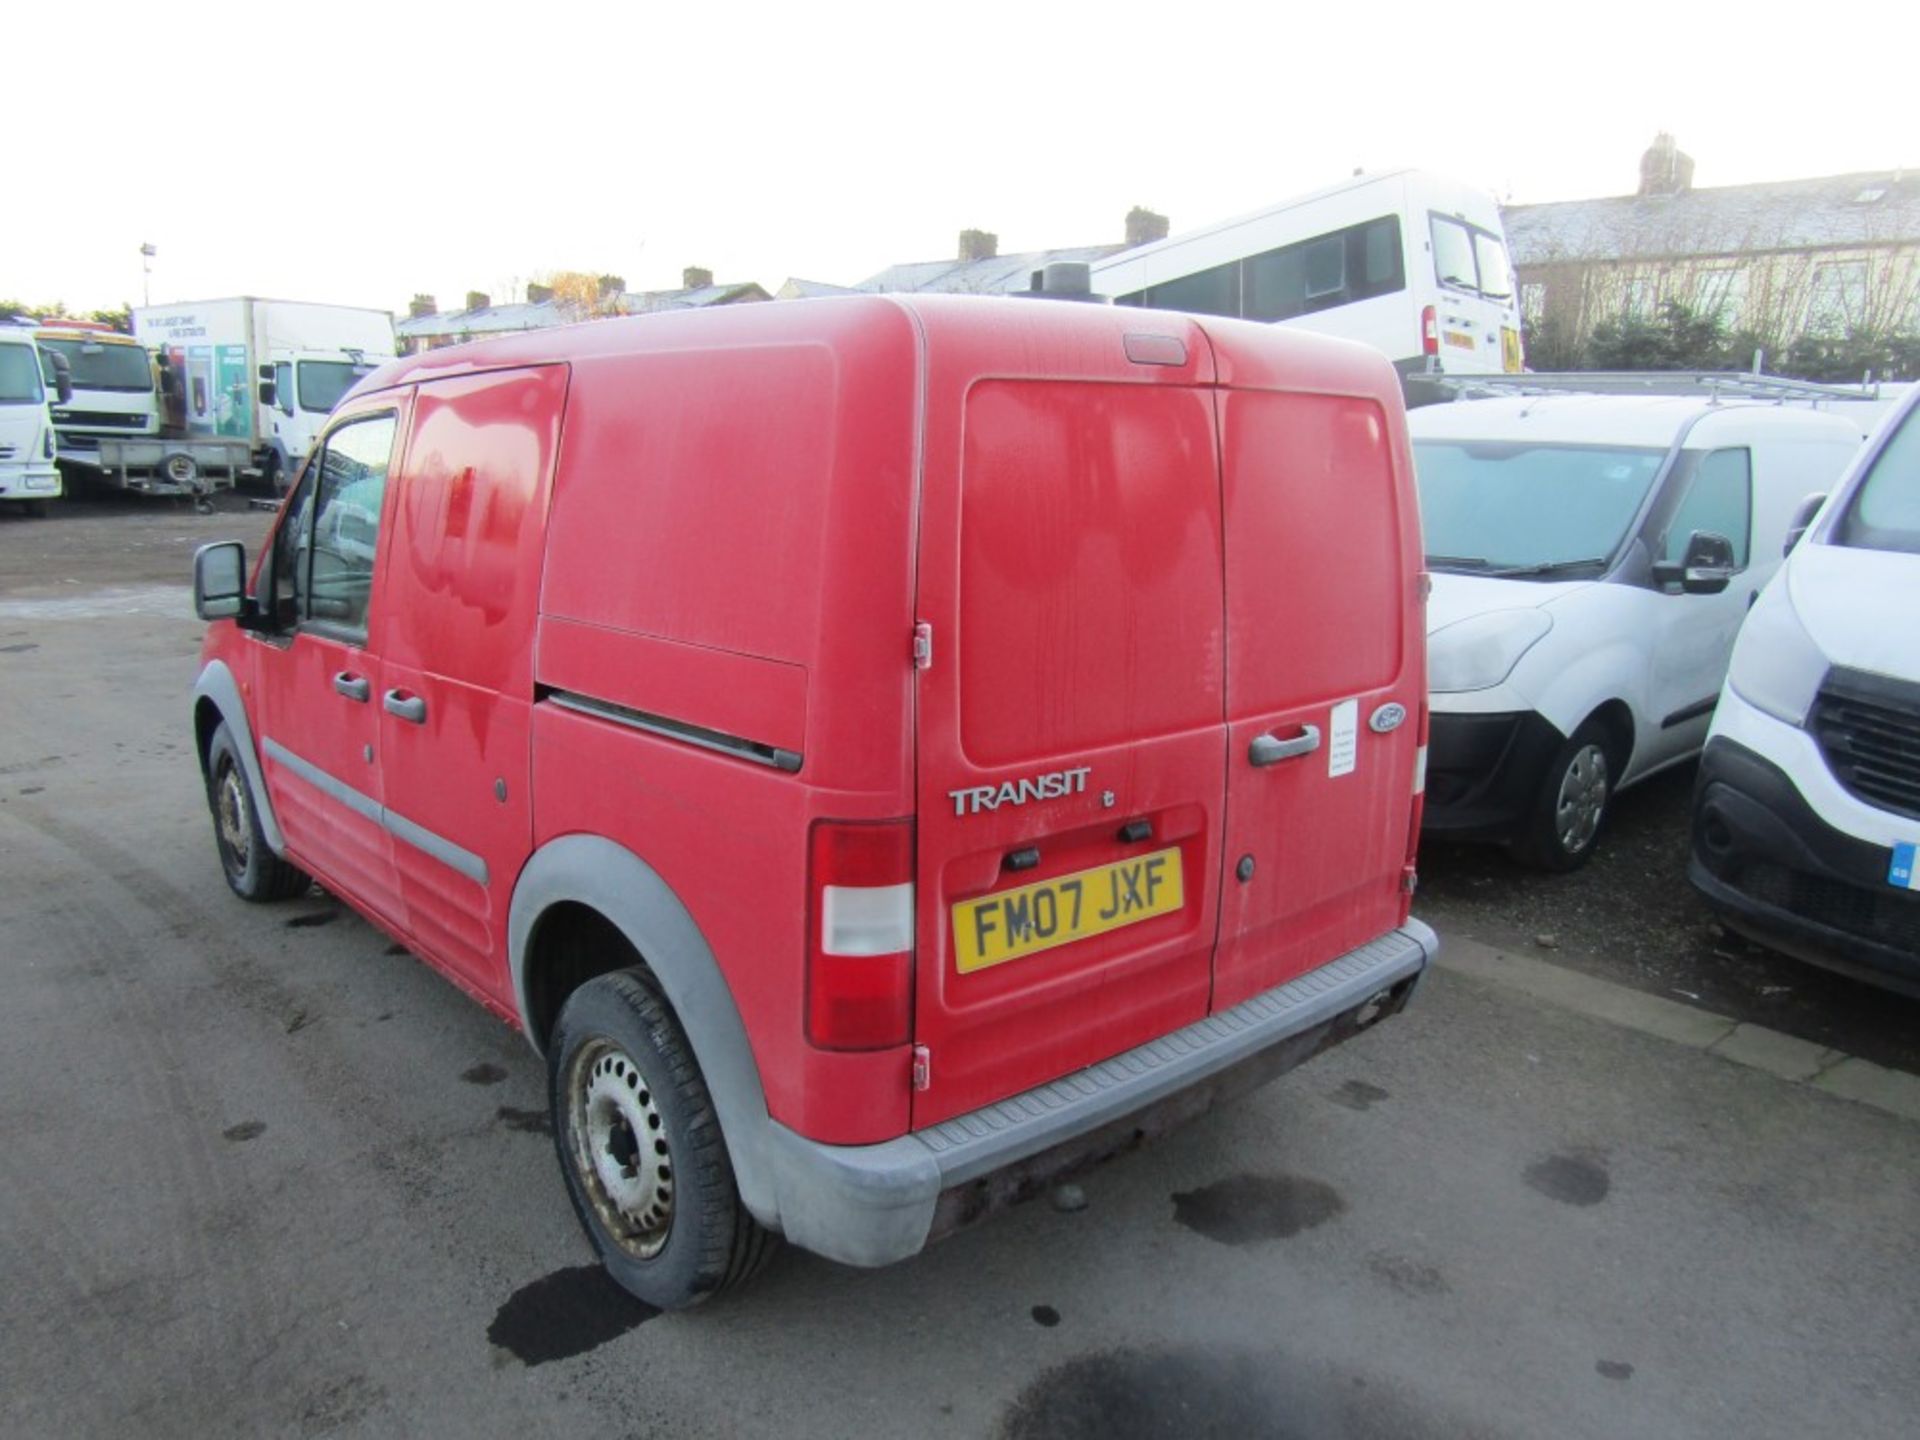 07 reg FORD TRANSIT CONNECT T220 L75 (DIRECT COUNCIL) 1ST REG 08/07, 71088M, V5 HERE, 1 OWNER FROM - Image 3 of 7